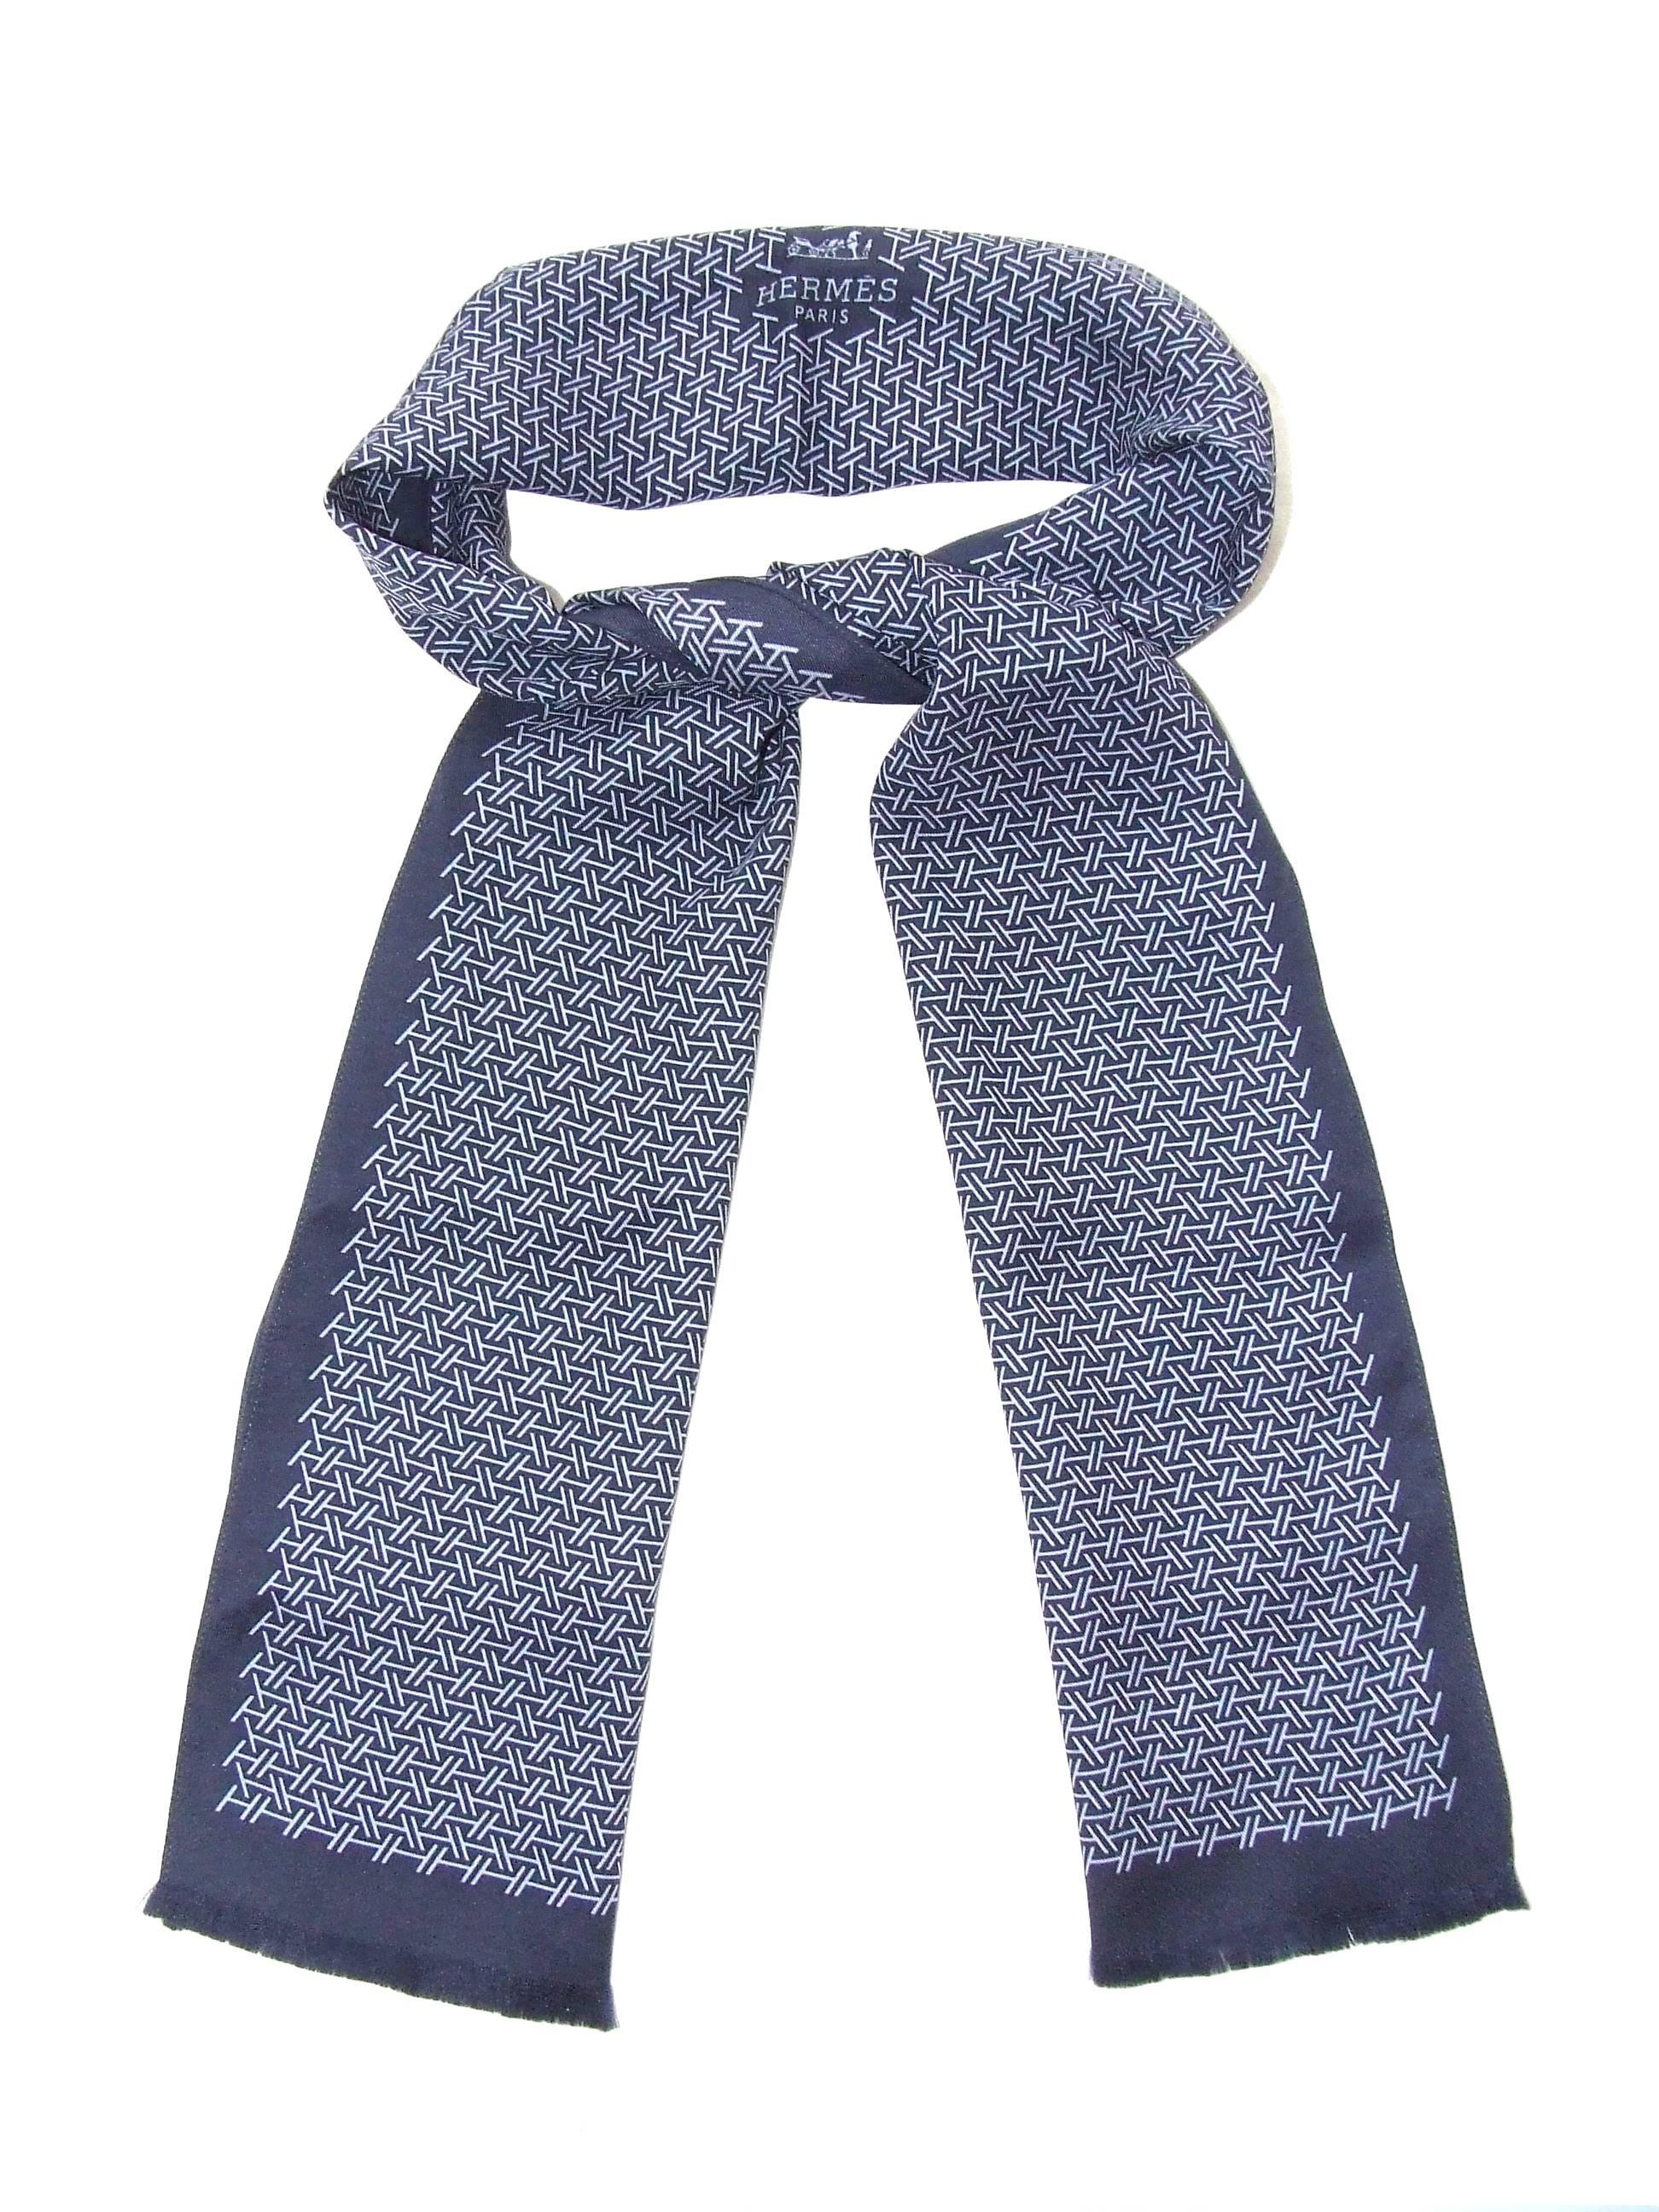 Beautiful Authentic Hermes Scarf-Tie

From the Men's Line but will fit women as well

Pattern: H printed

Made in France

Made of 100% Silk

Colorway: Navy Blue Background, Light Blue "H"

Fringed at the ends

"HERMES PARIS" and